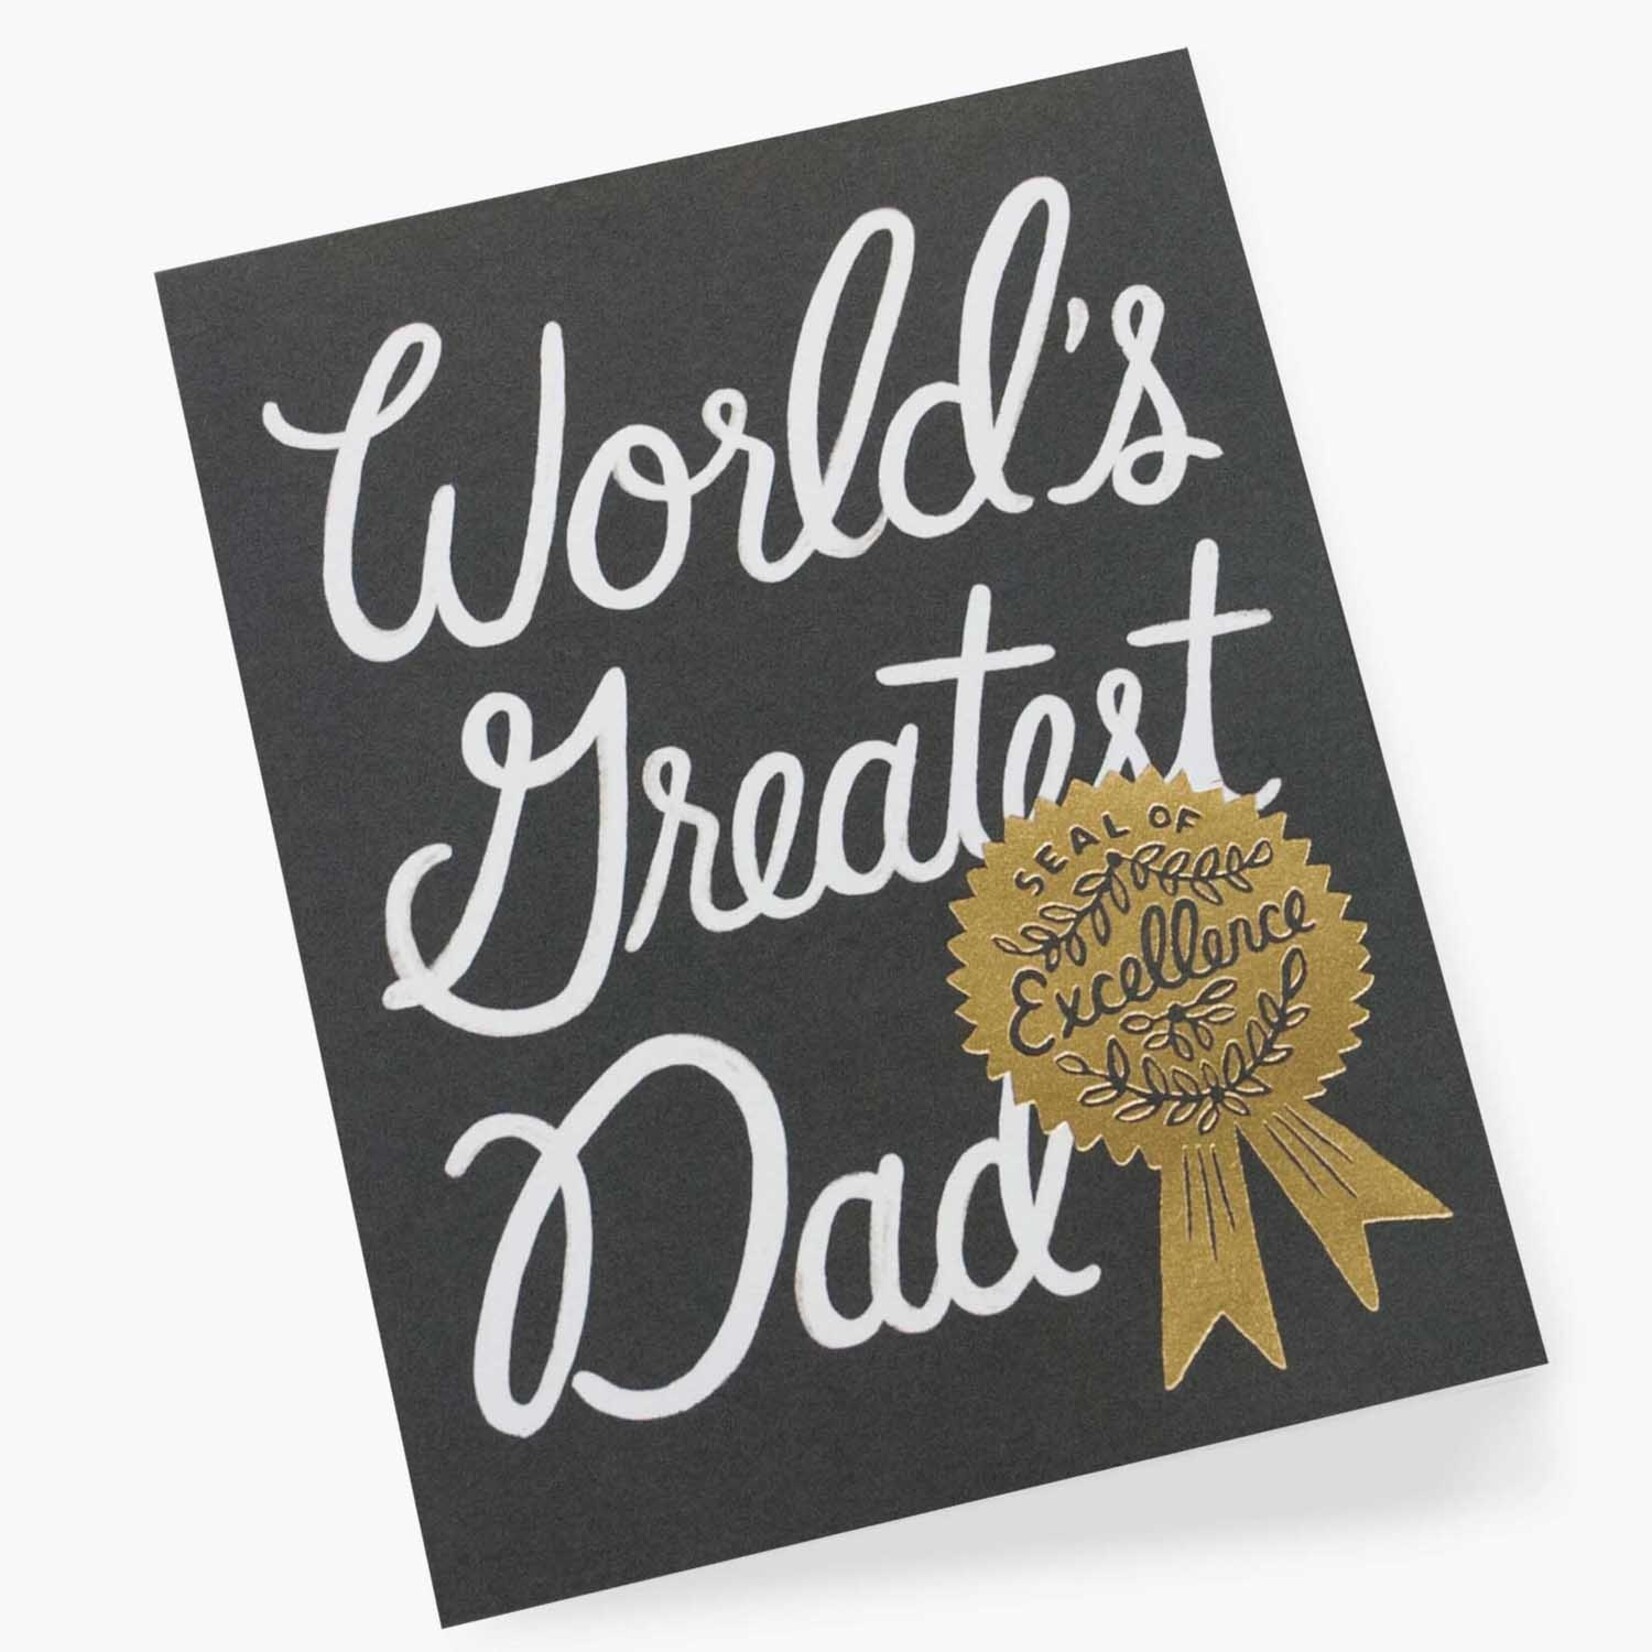 Rifle Paper Company Worlds Greatest Dad